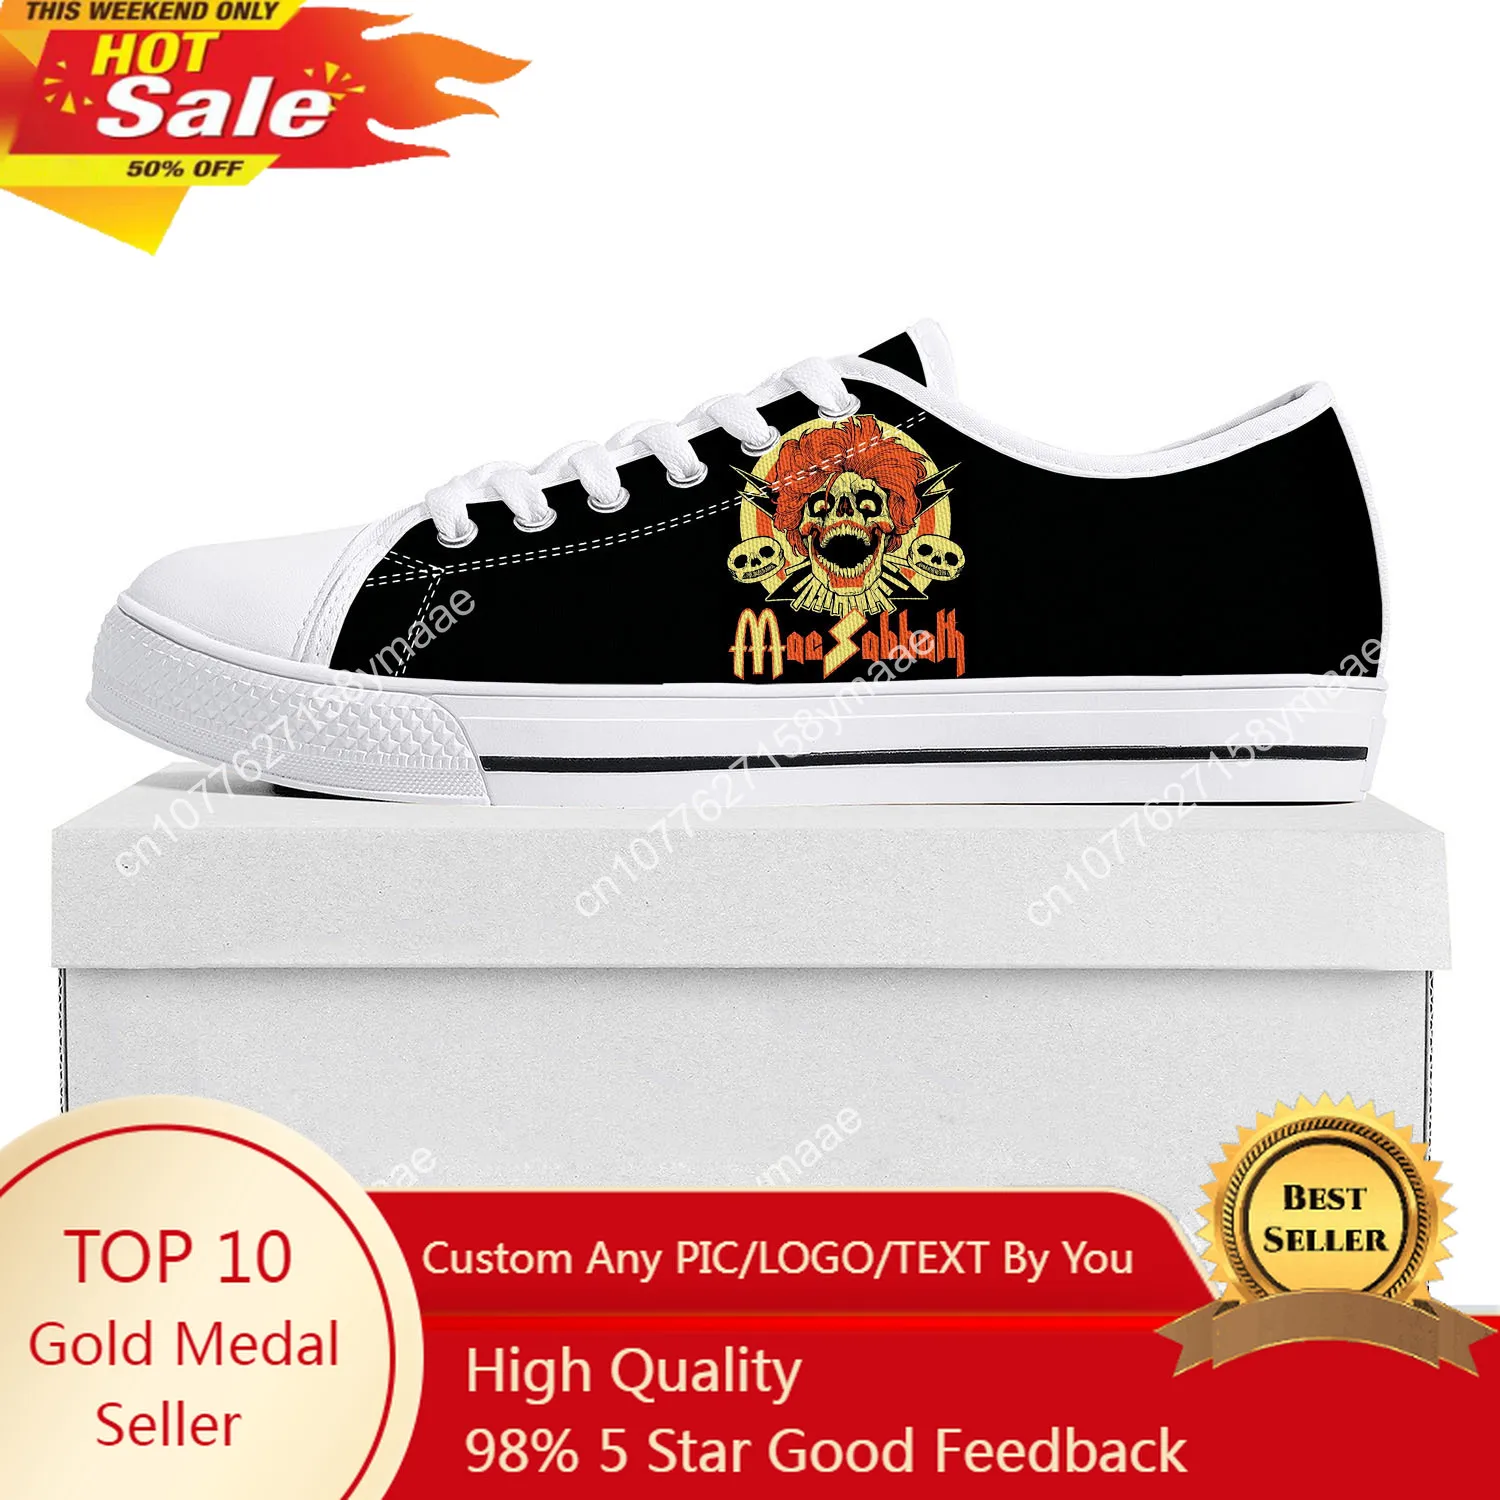 Mac Sabbath Low Top Sneakers Mens Womens Teenager Canvas High Quality Sneaker Casual Custom Made Shoes Customize Shoe White asterix adventure obelix low top sneakers womens mens teenager high quality canvas sneaker casual anime cartoon customize shoes